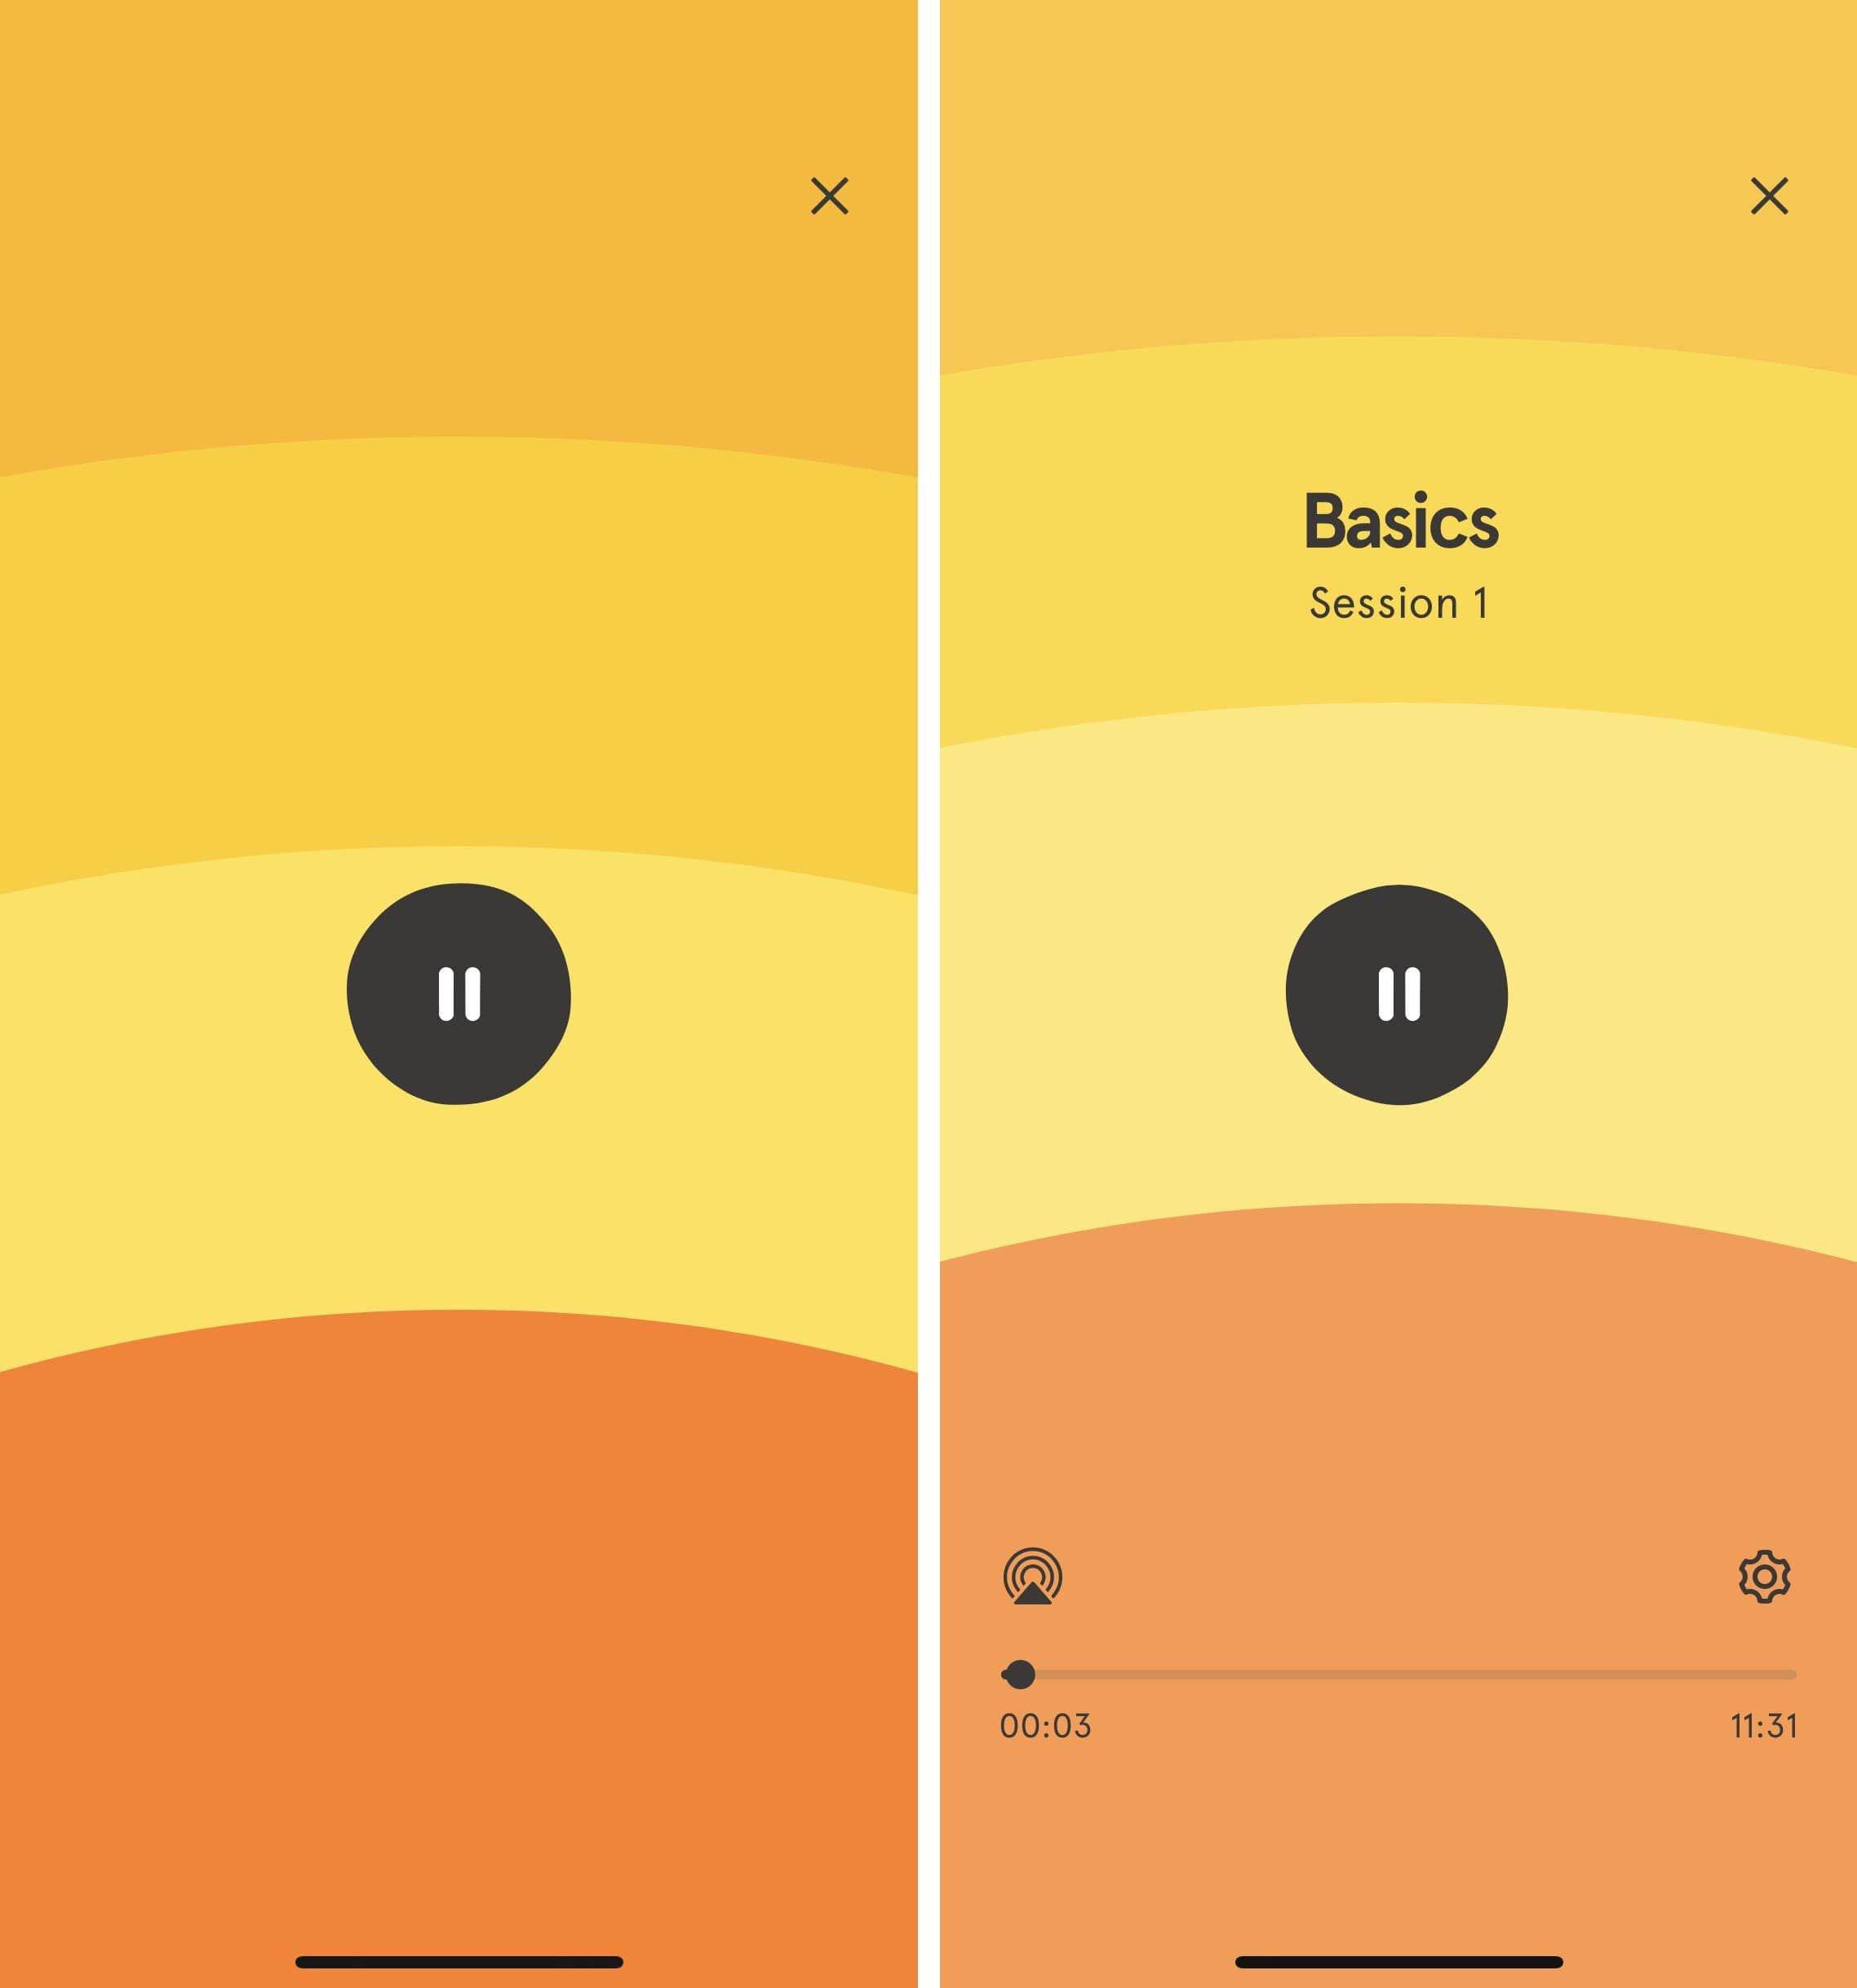 It’s essential for a meditations app to use habitual UX patterns (*shots from [Calm App](https://www.headspace.com/){ rel="nofollow" target="_blank" .default-md}*)